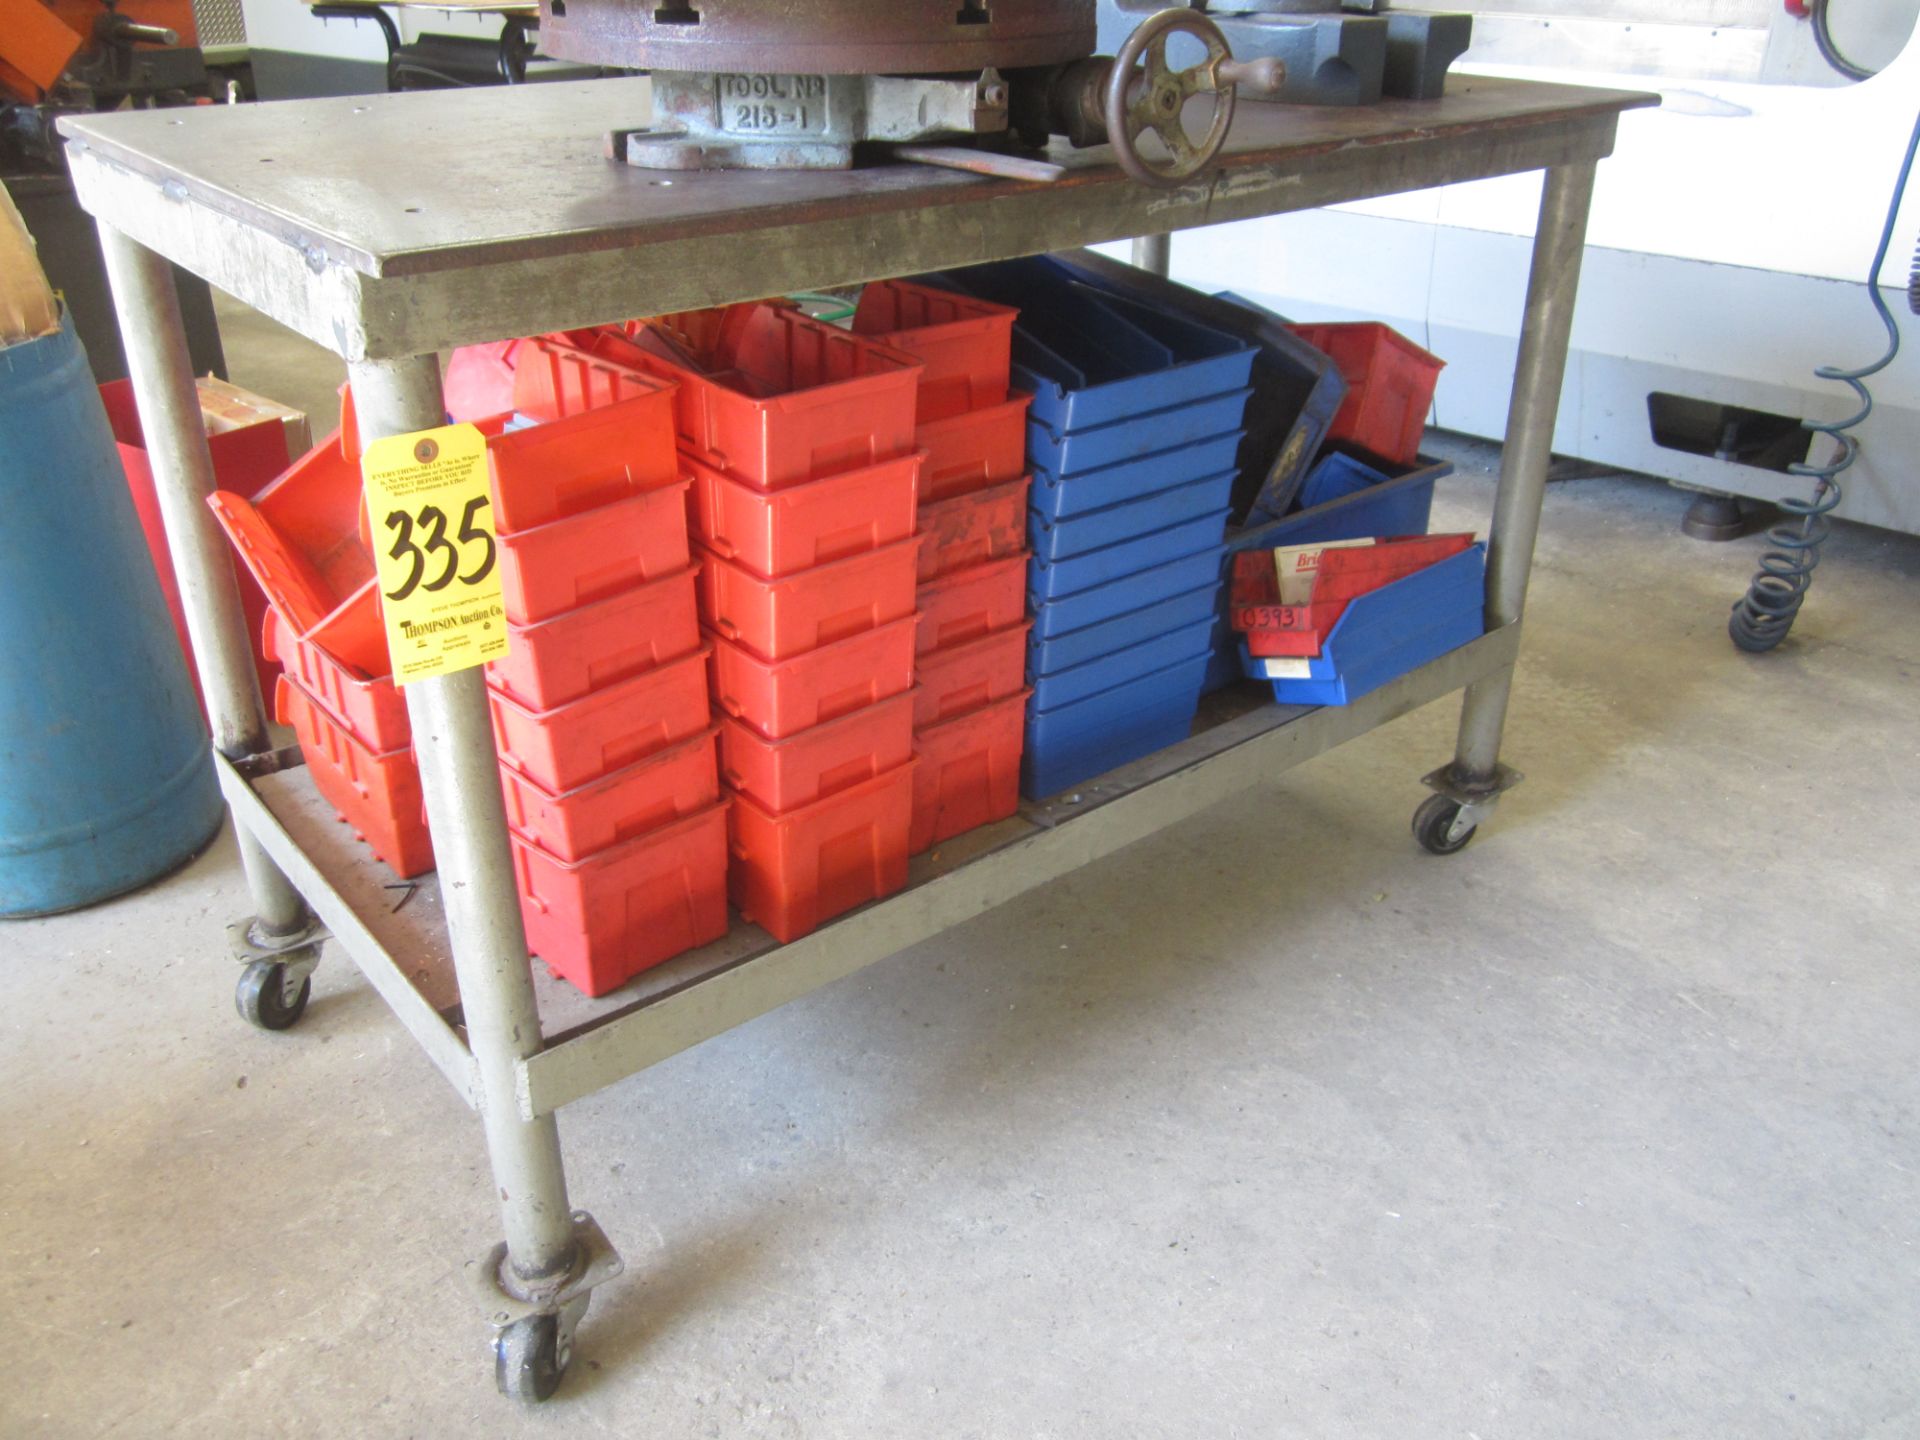 Portable Steel Shop Table, 28 In. X 48 In. X 3/8 In. Thick Top and Plastic Parts Totes